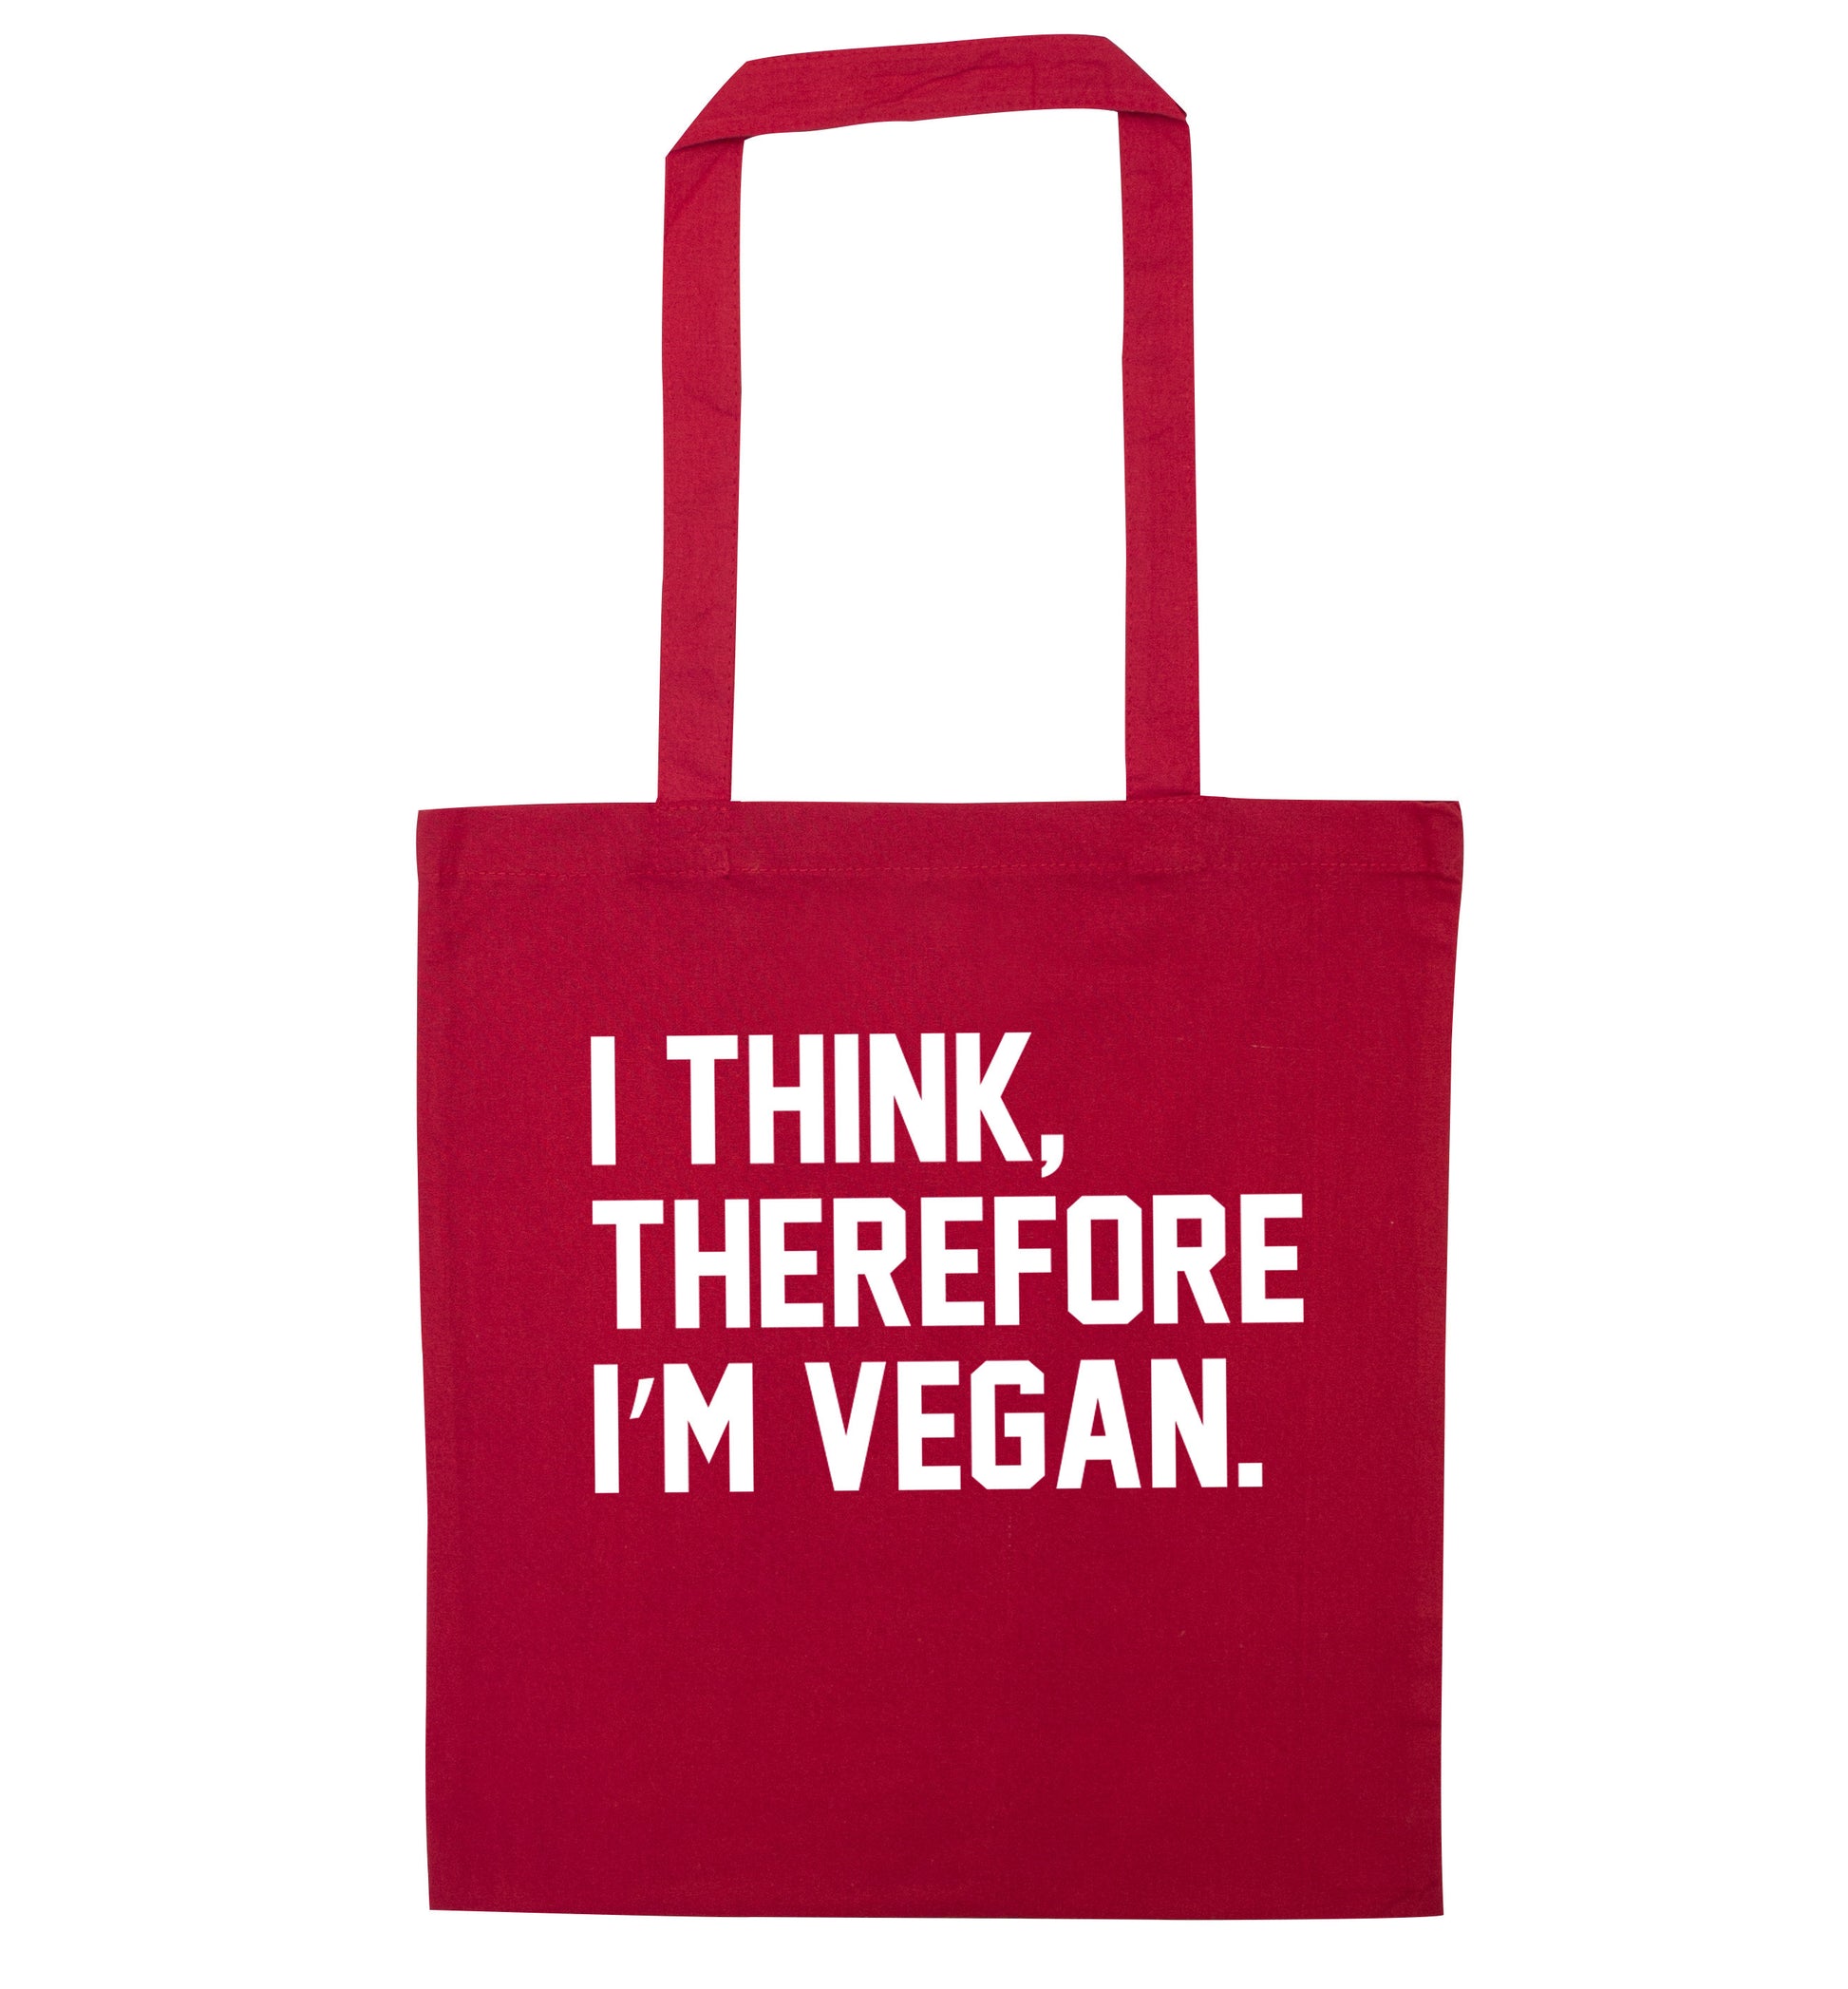 I think therefore I'm vegan red tote bag